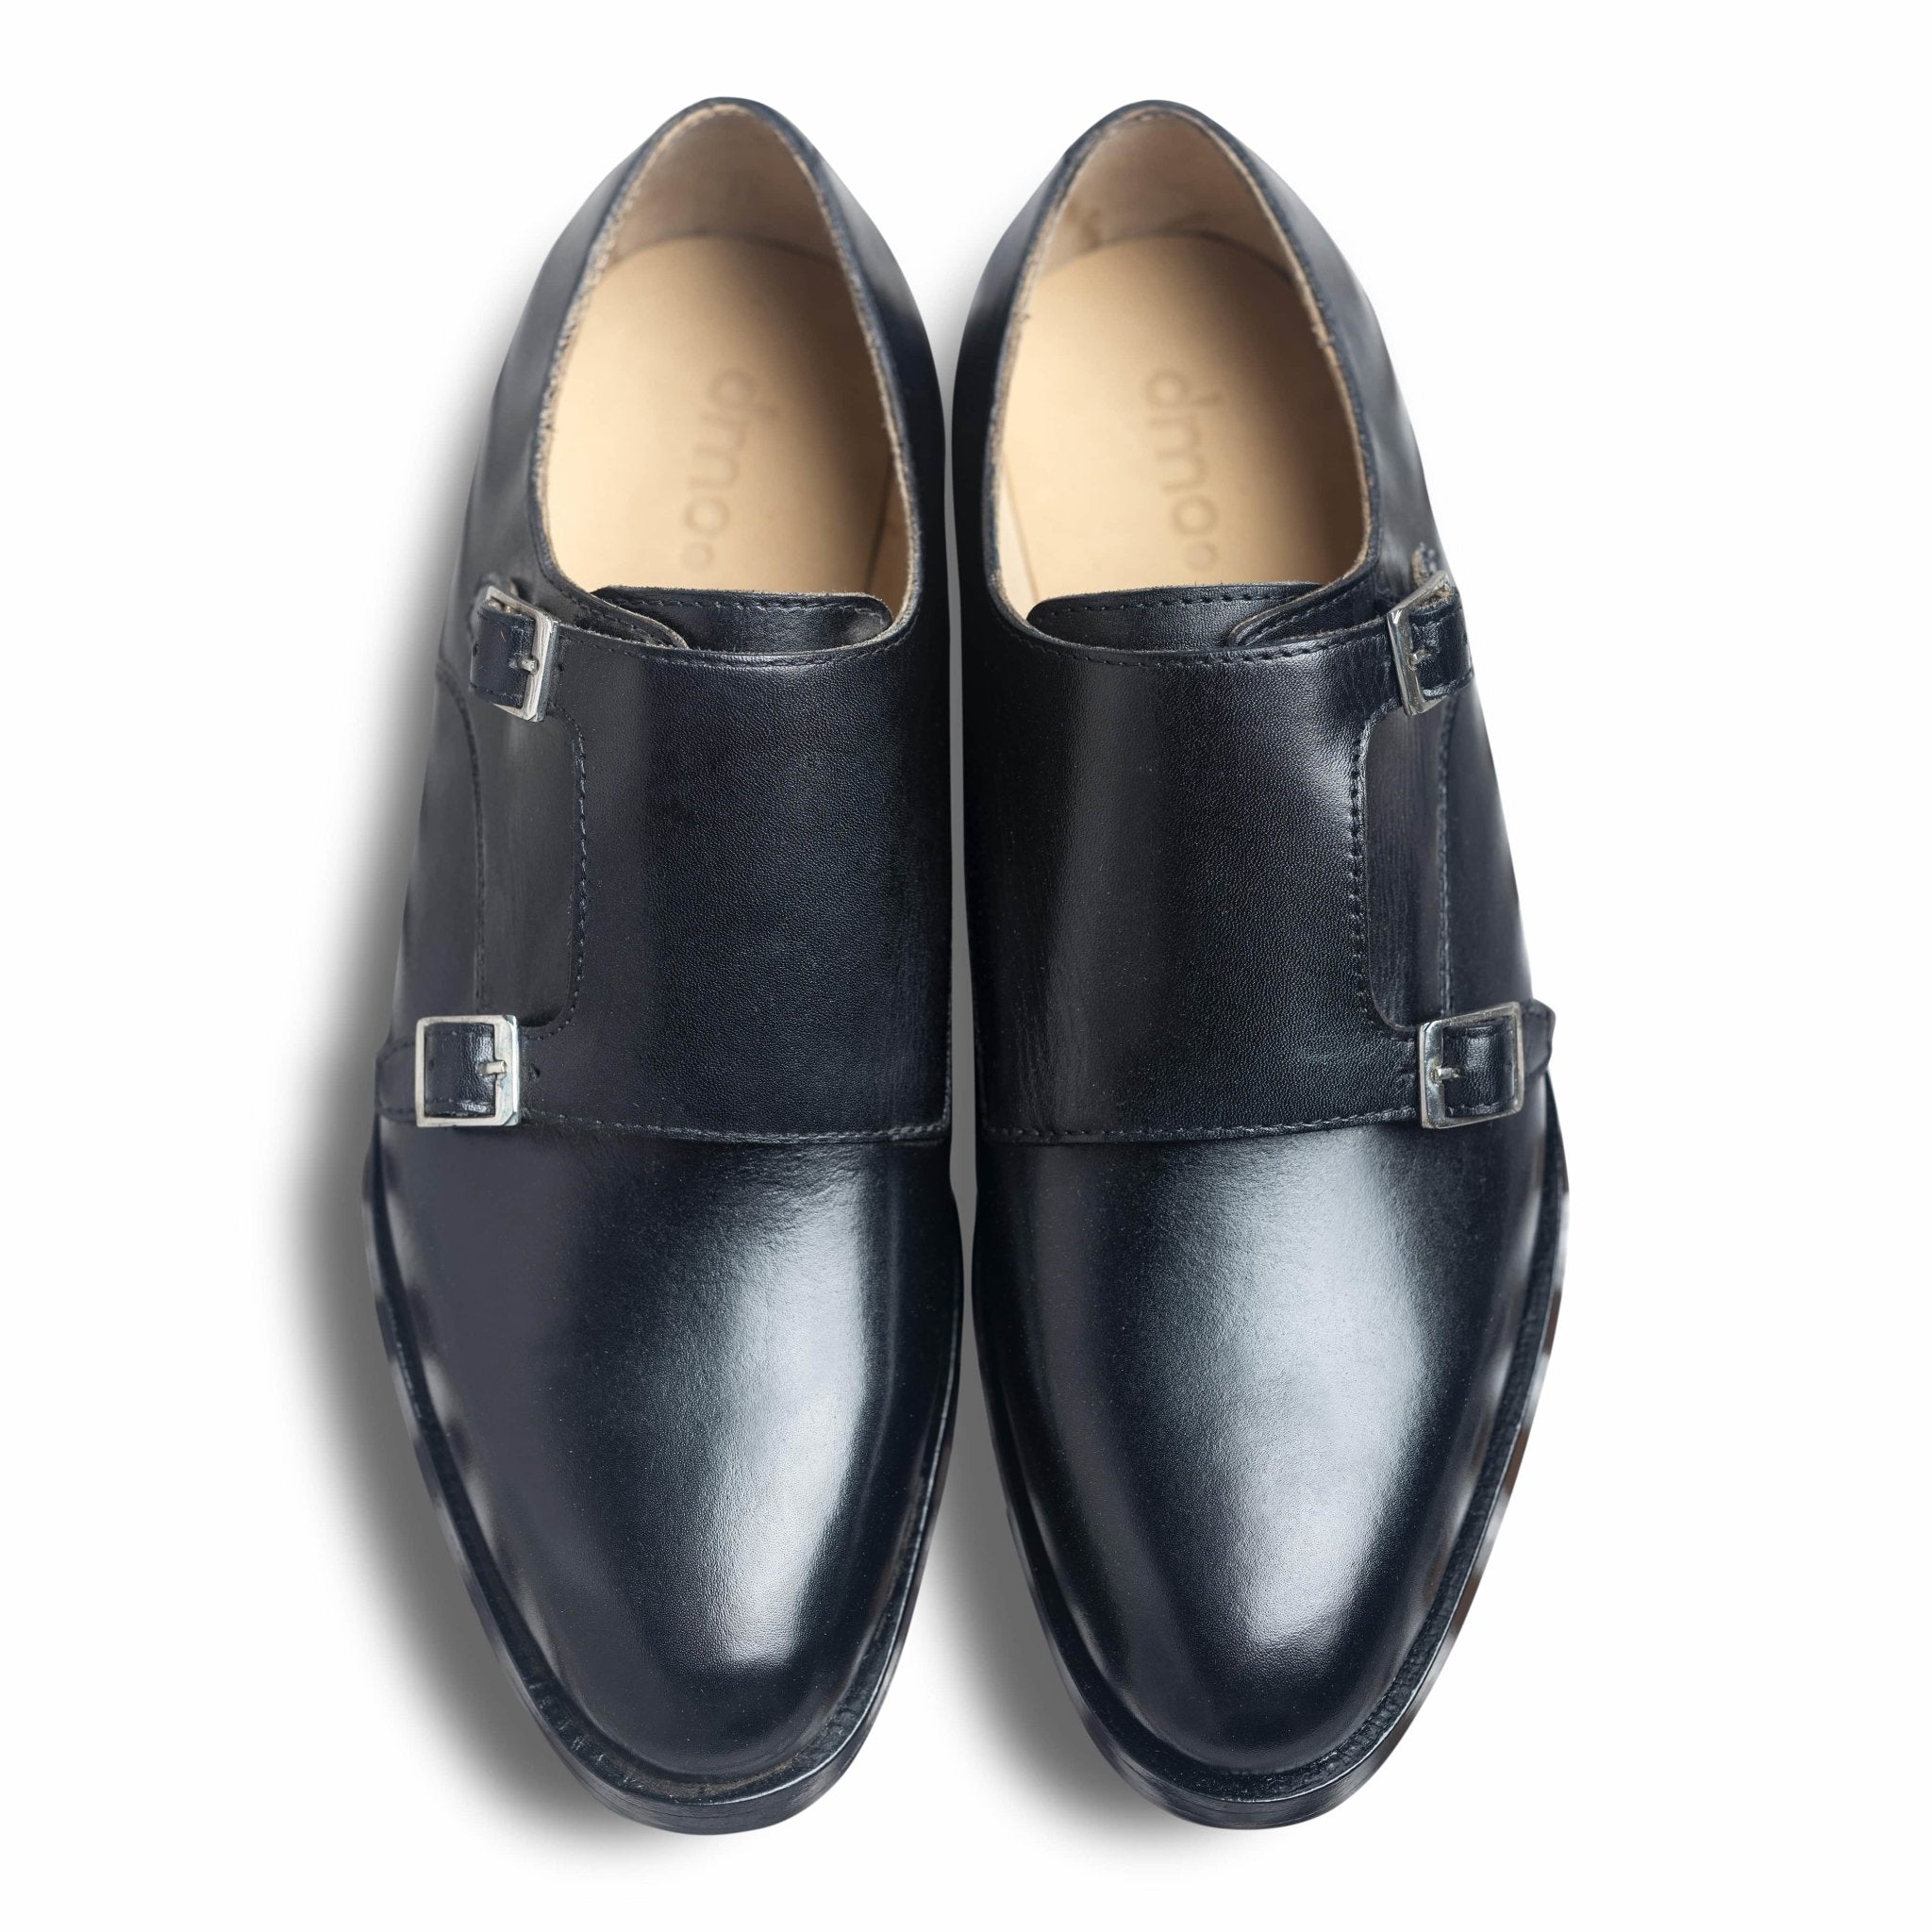 Domo Nera | Double Monk Strap Leather Shoes for Men | dmodot